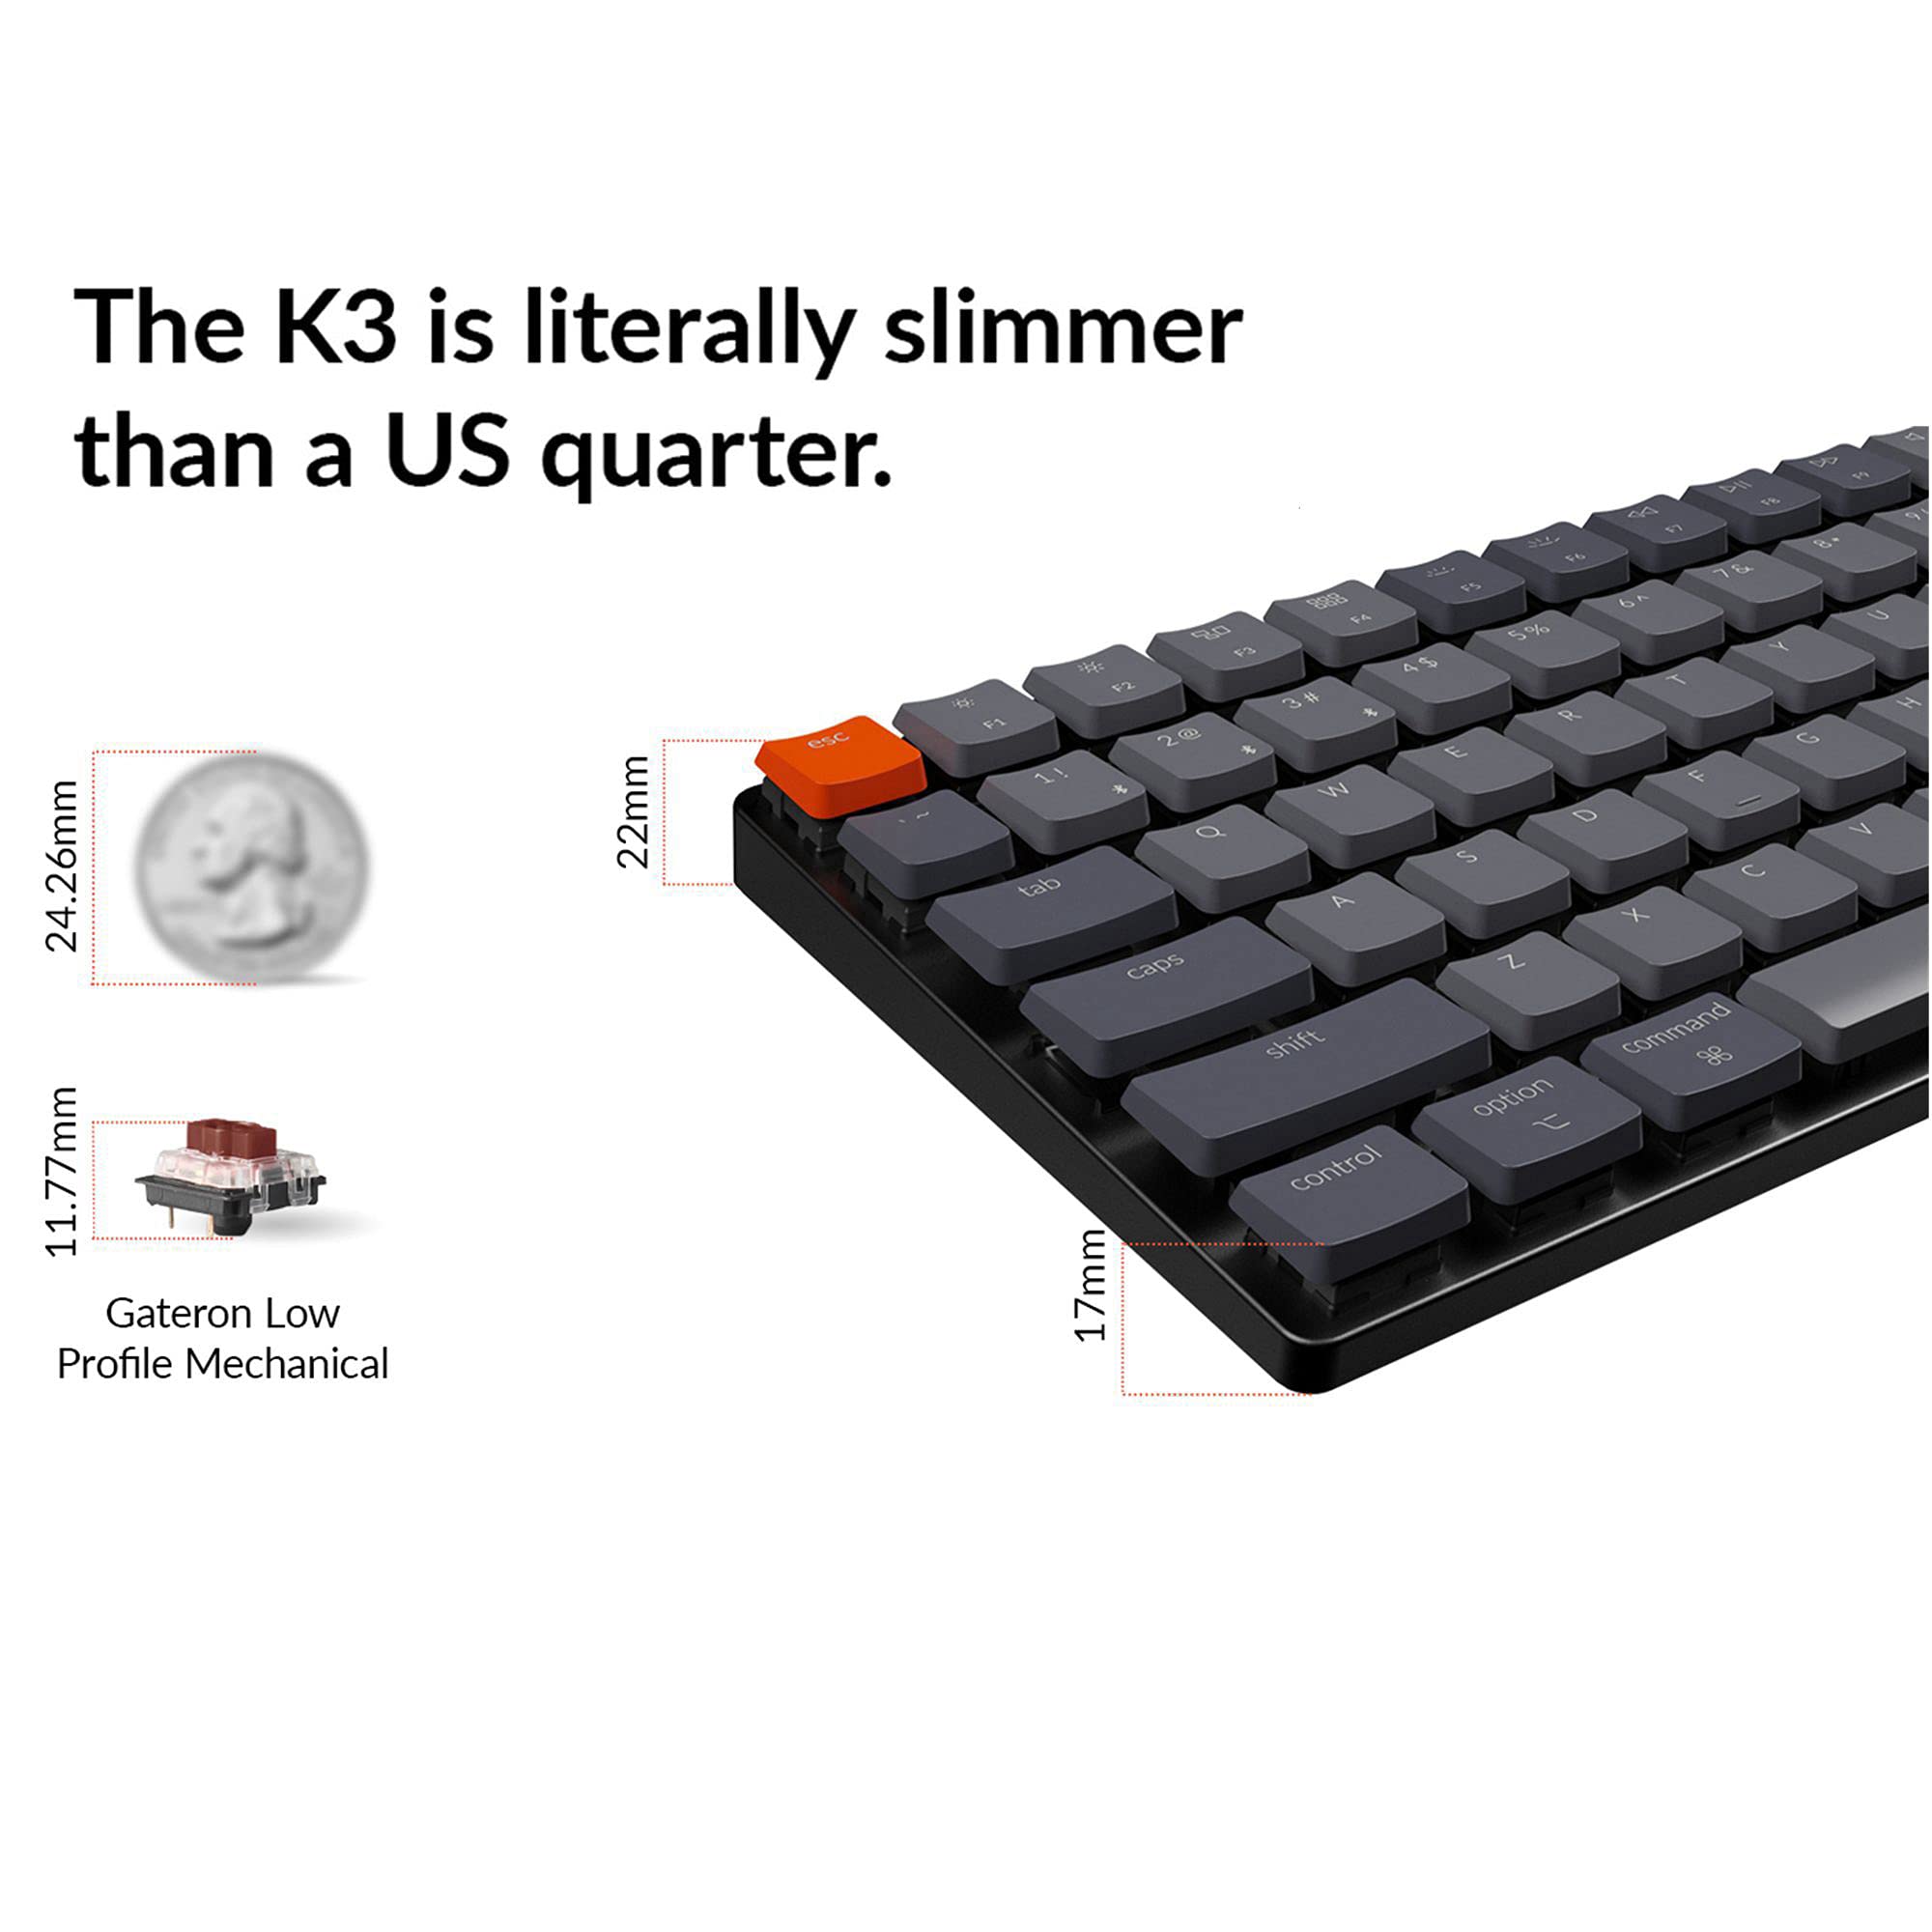 Keychron K3 Version 2, 84 Keys Ultra-Slim Wireless Bluetooth/USB Wired Mechanical Keyboard with White LED Backlit, Low-Profile Gateron Mechanical Brown Switch Compatible with Mac Windows